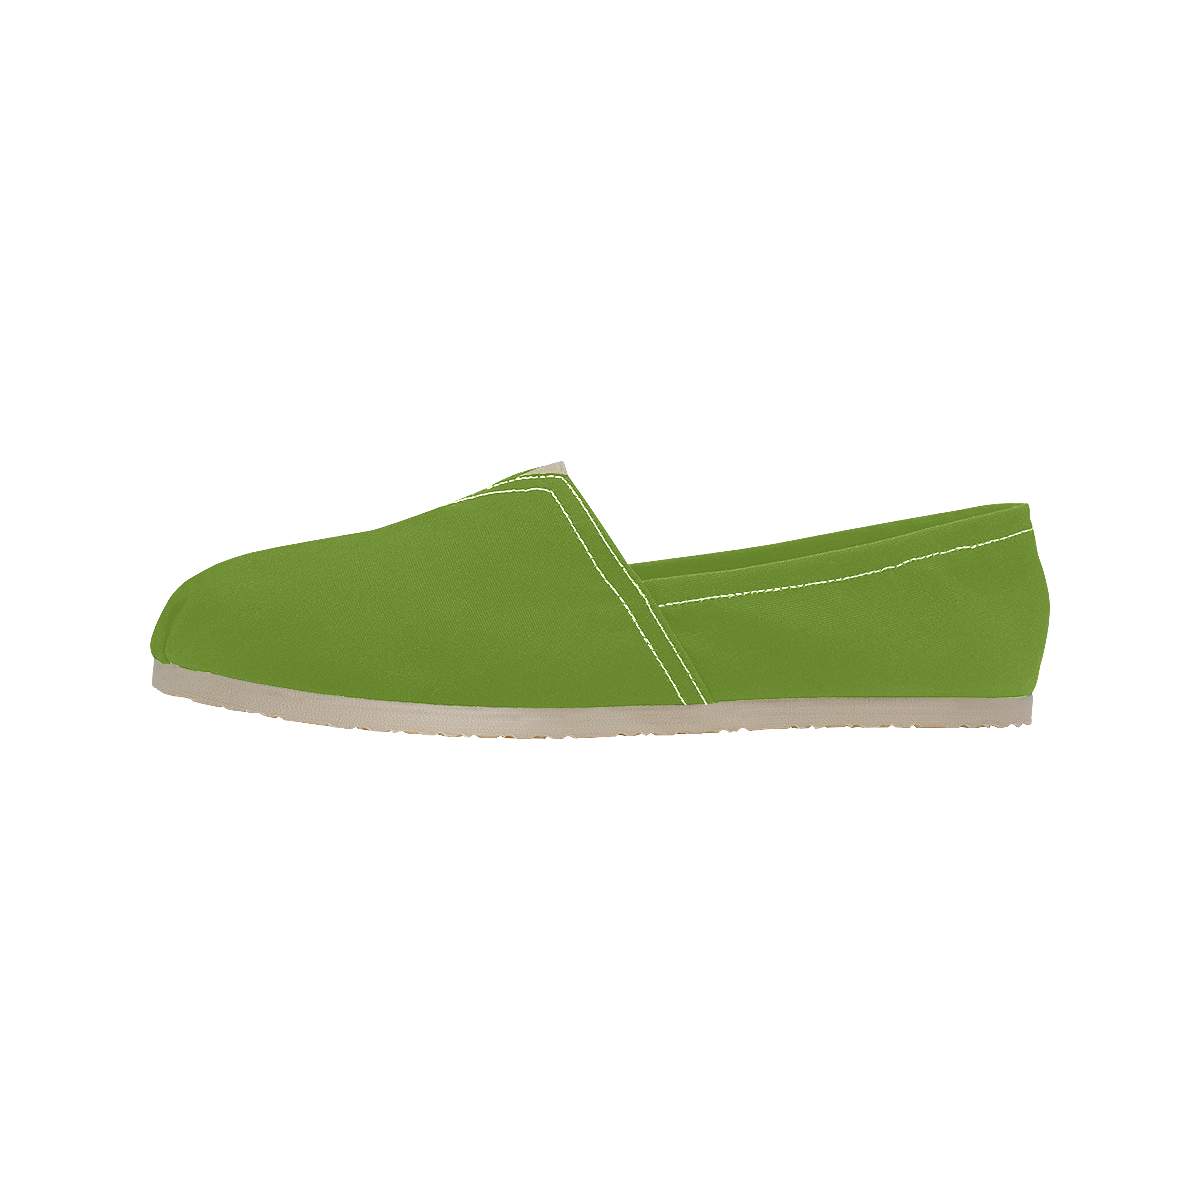 color olive drab Women's Classic Canvas Slip-On (Model 1206)